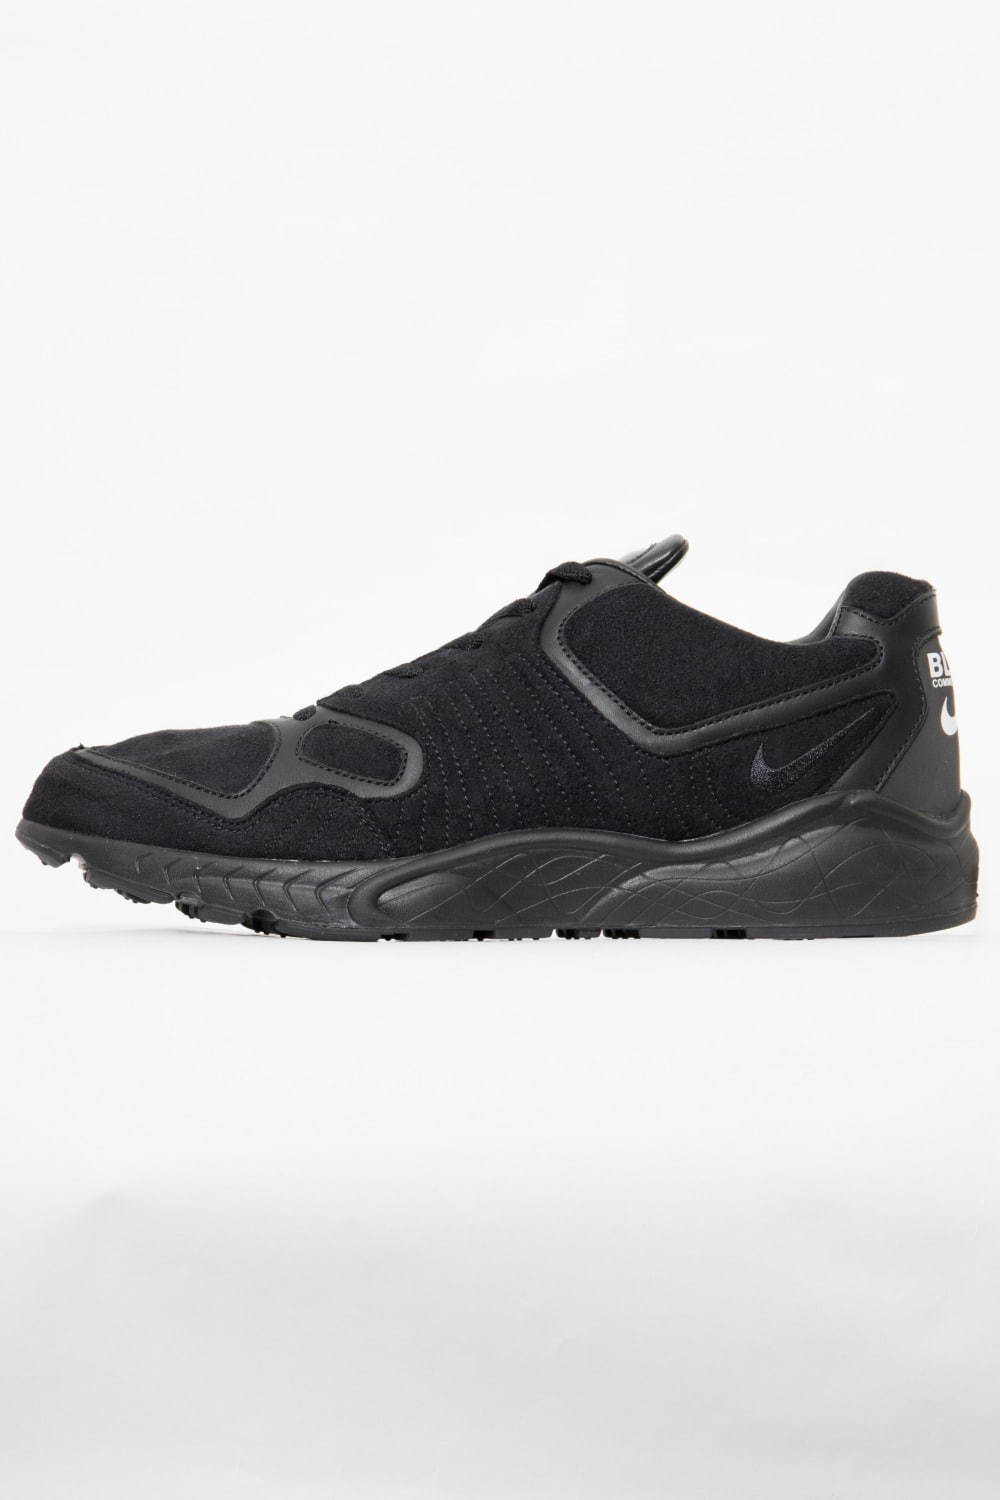 black-comme-des-garcons-nike-air-zoom-talaria-release-20210123